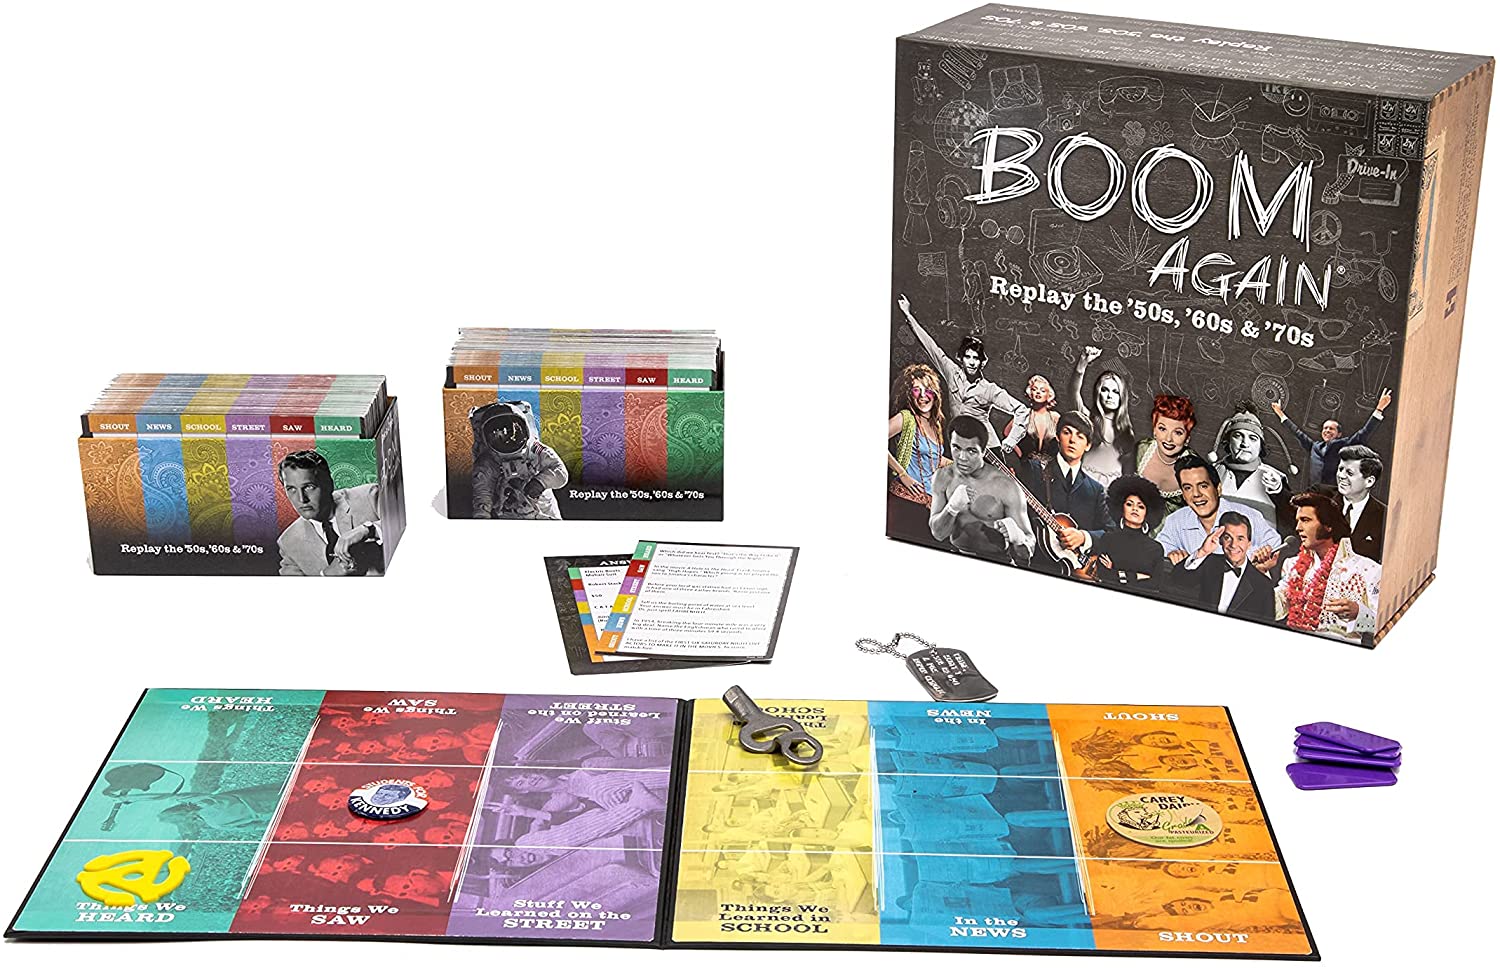 Boom Again Board Game - Boomer Trivia Game About The '50s, '60s and '70s